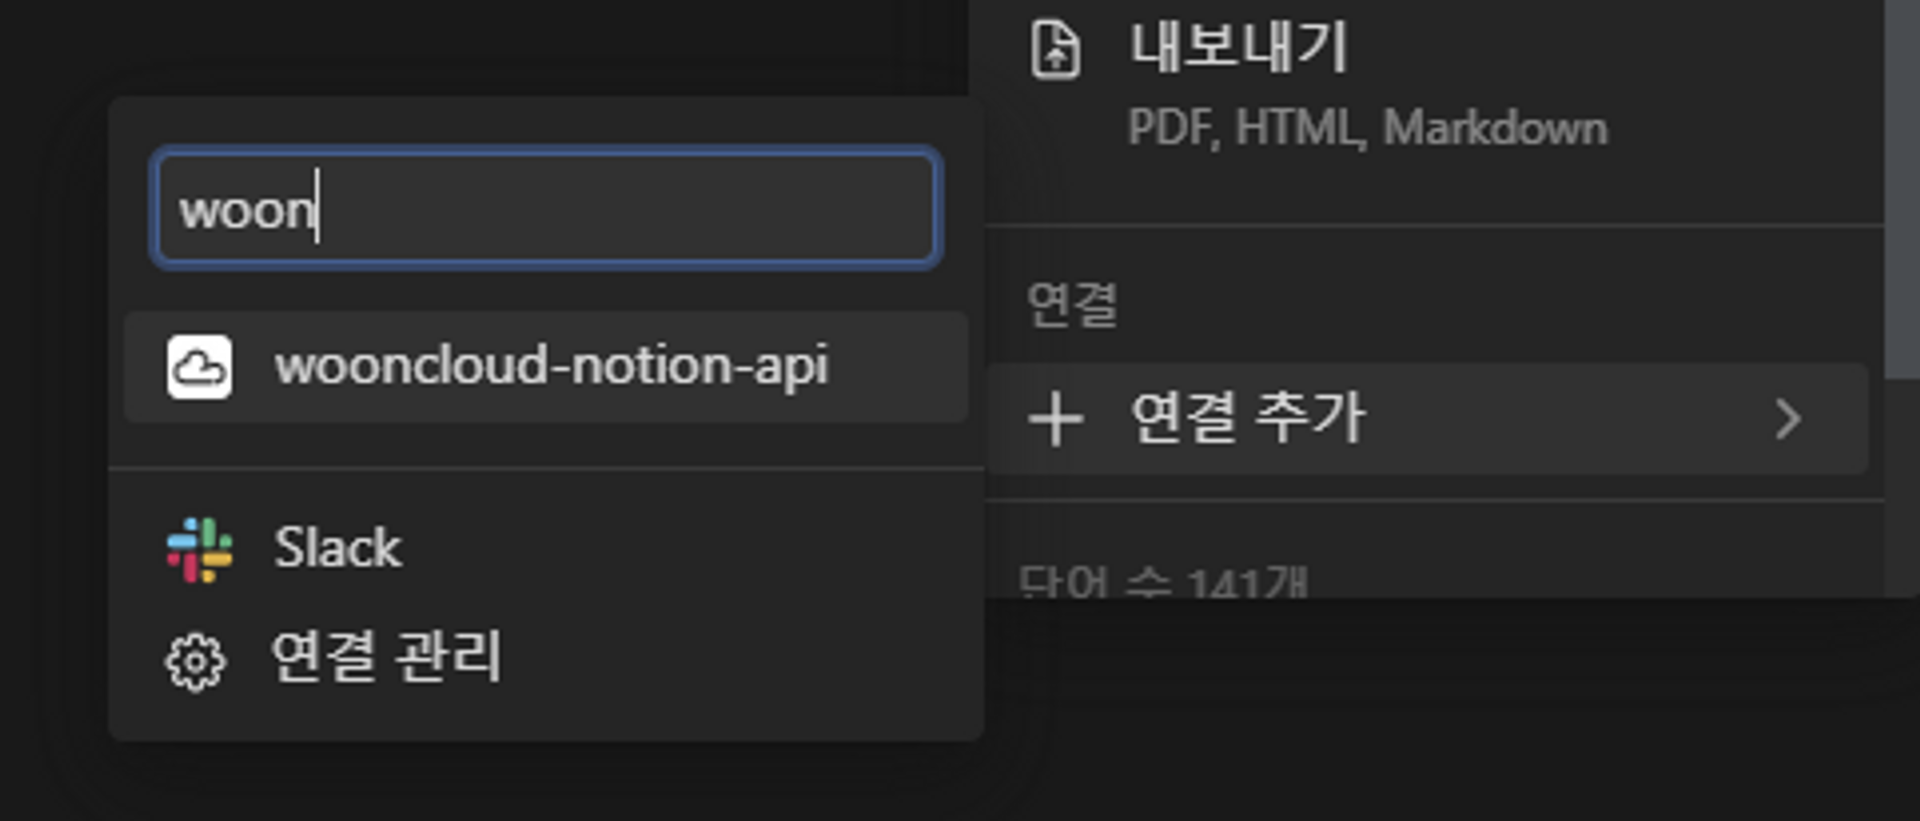 Appearance of API logo and name created in Notion